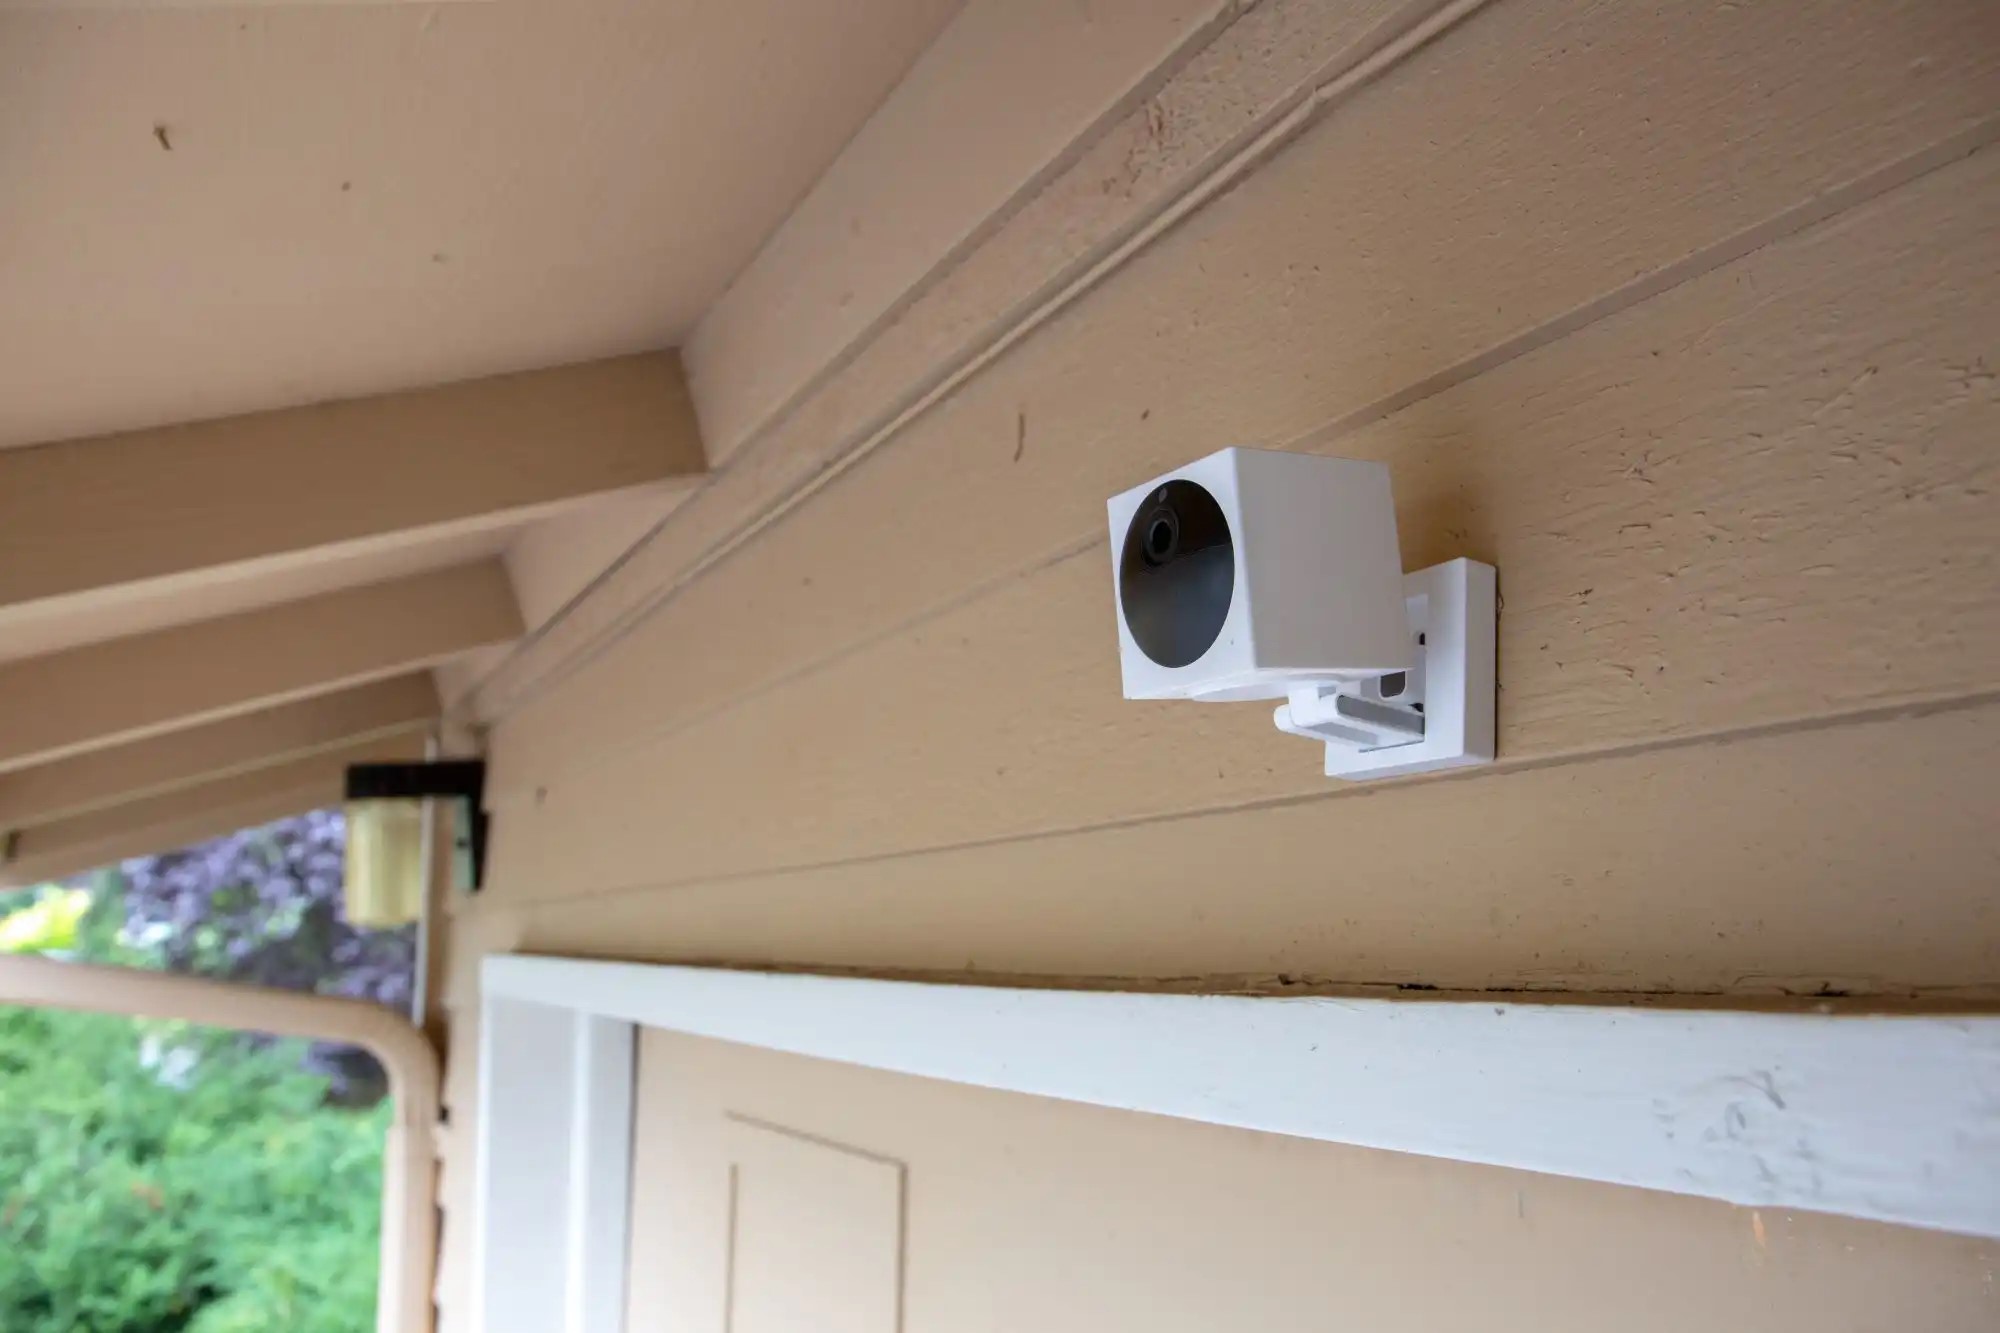 How To Connect Wyze Outdoor Camera